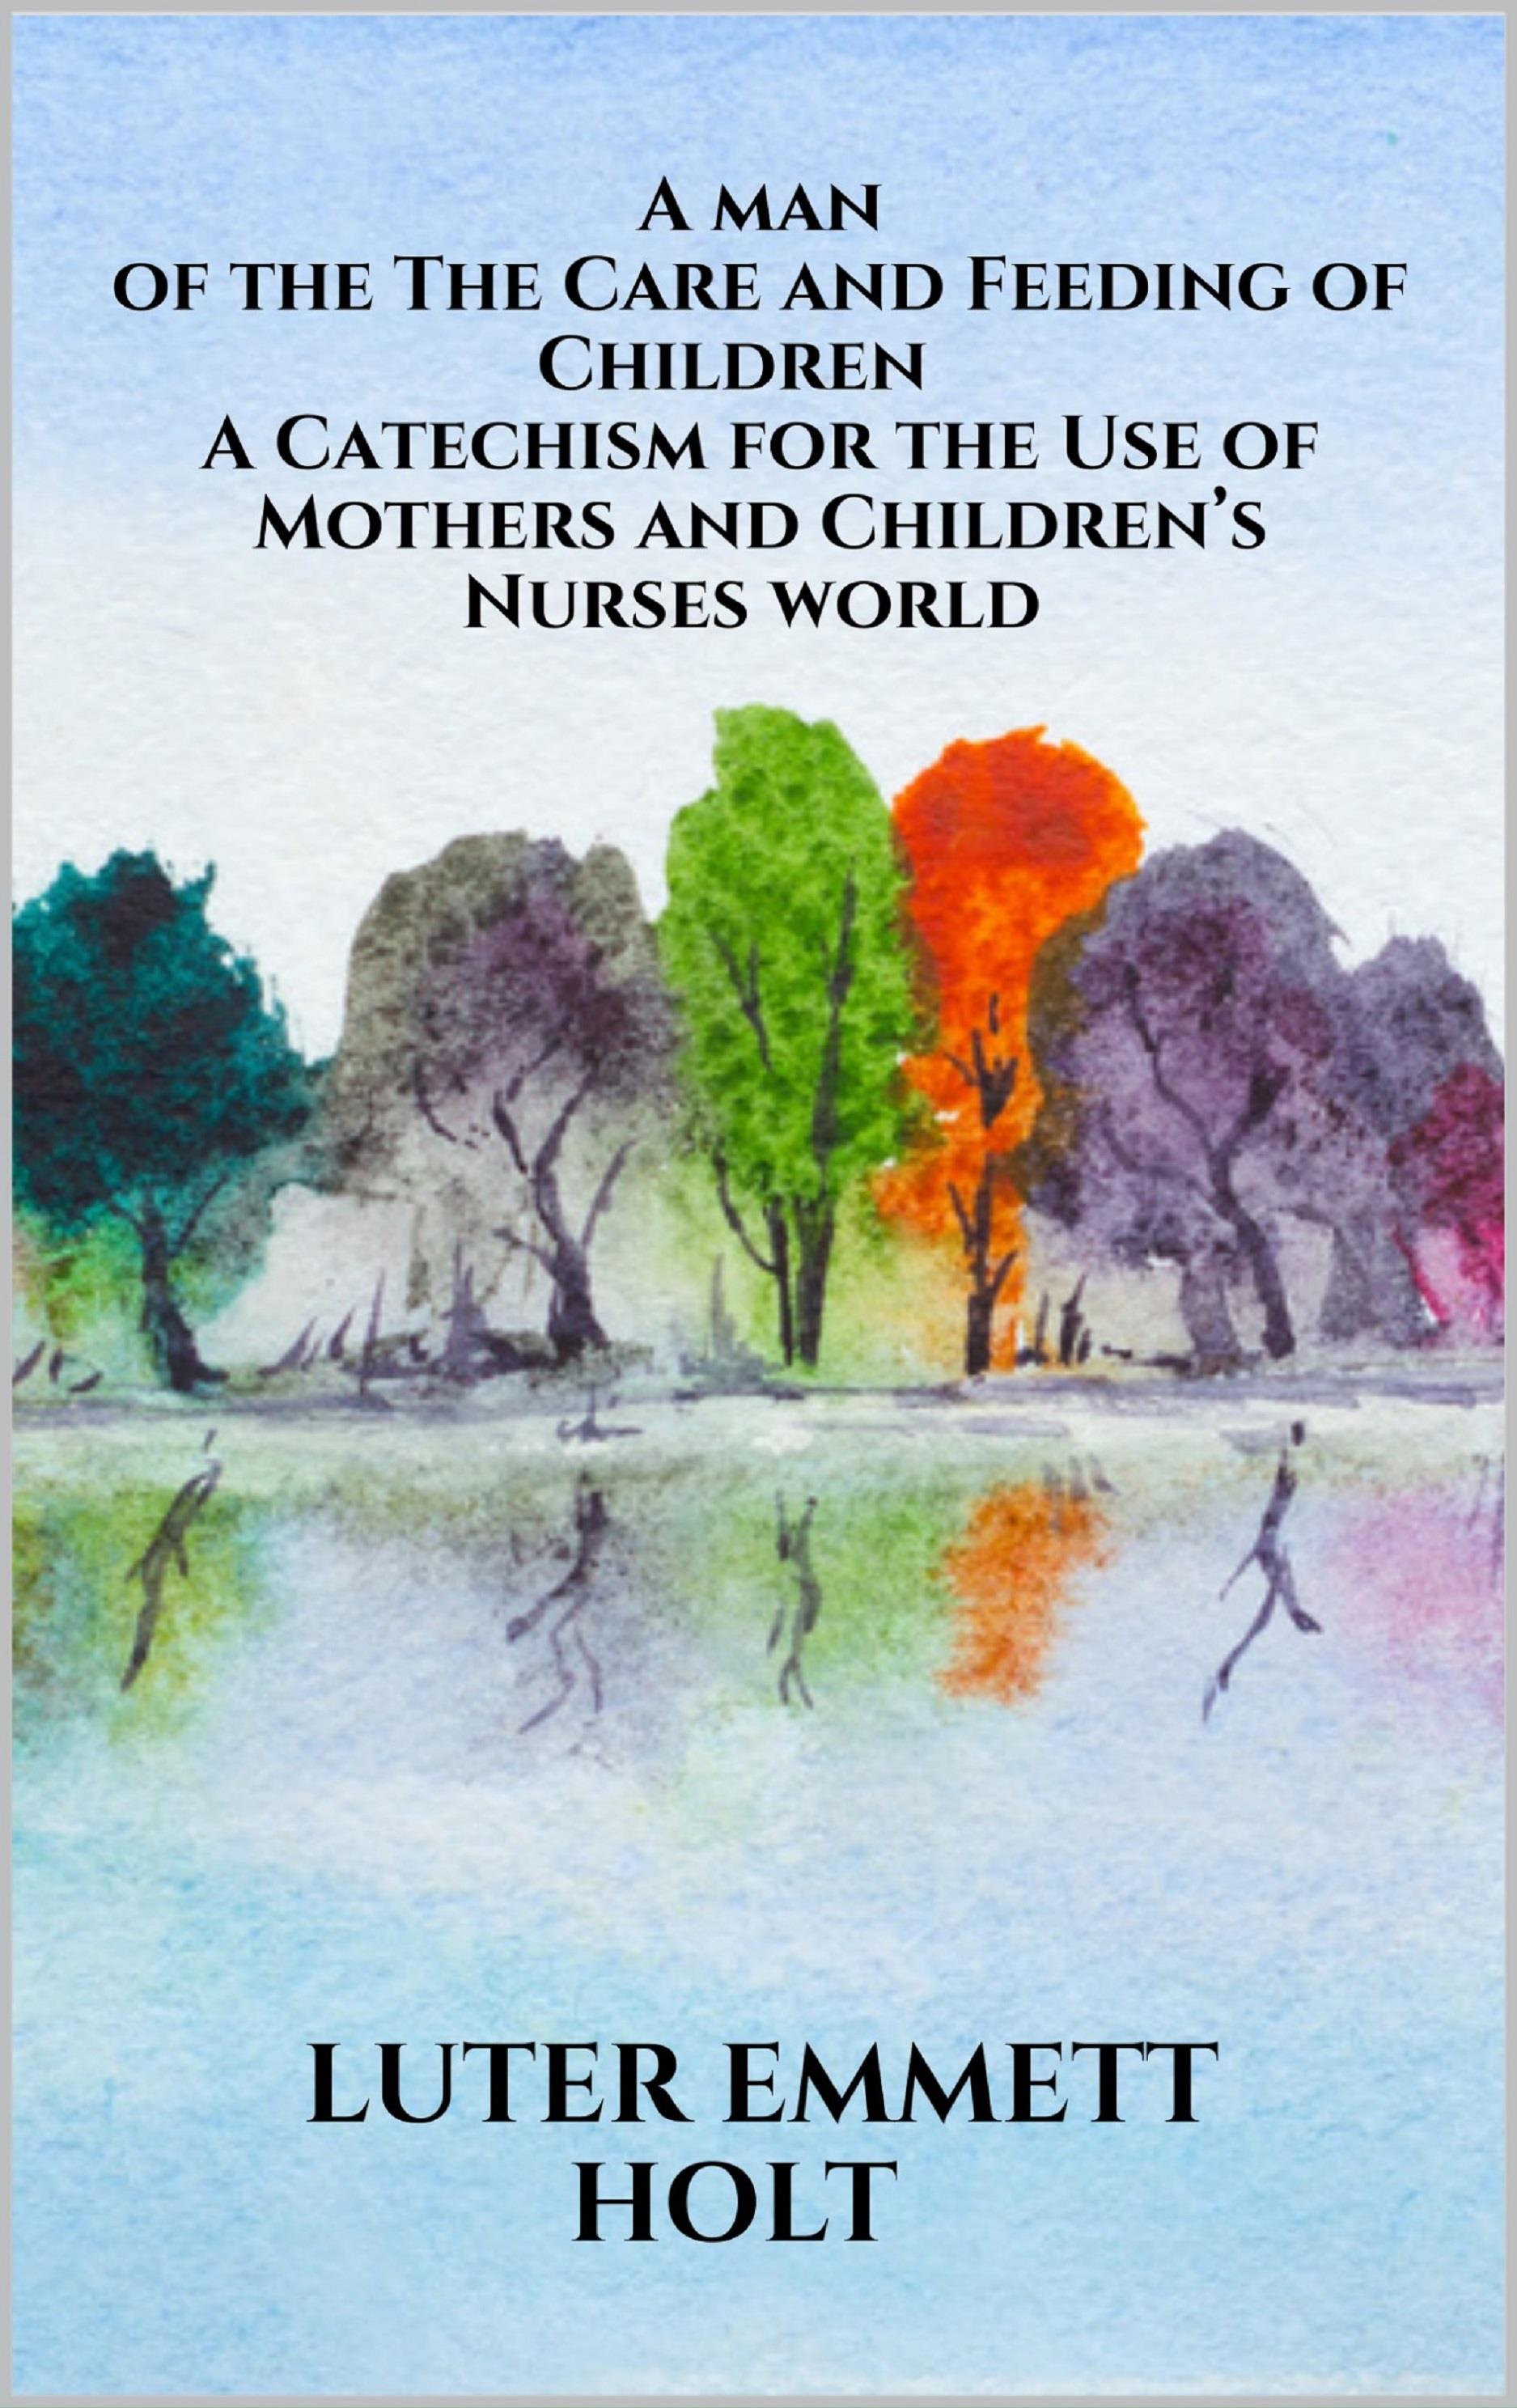 The Care and Feeding of Children -  A Catechism for the Use of Mothers and Children’s Nurses